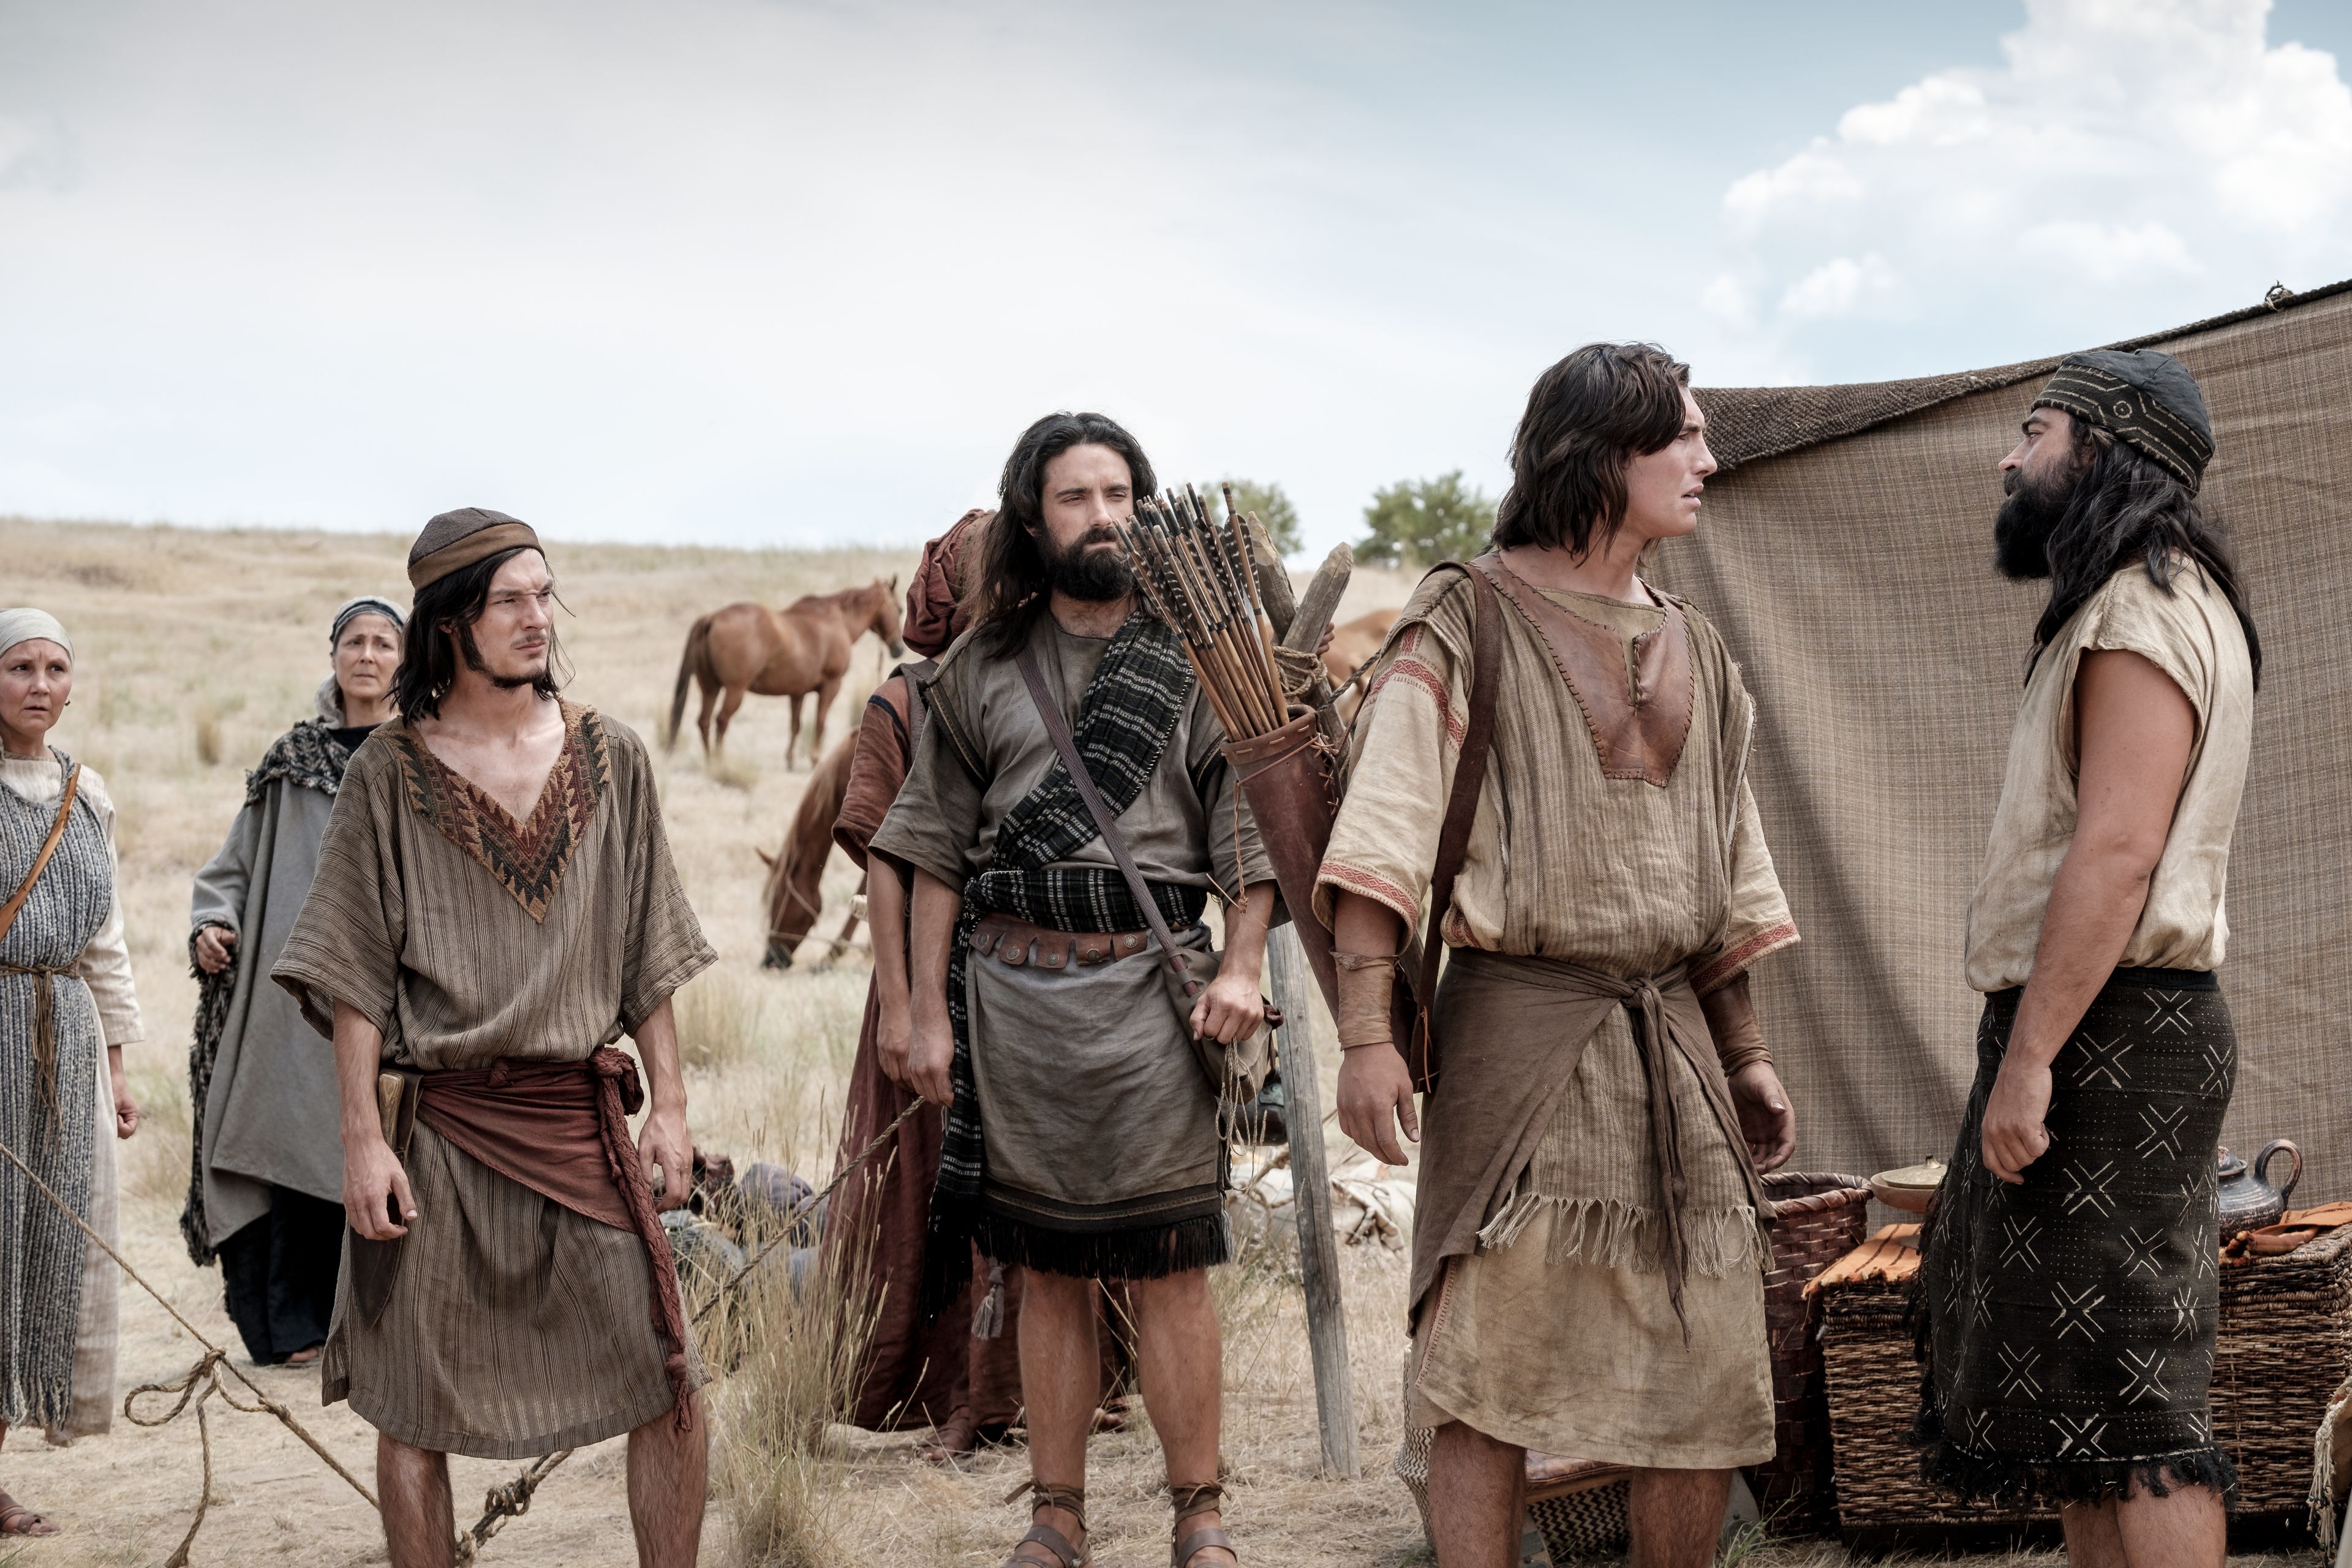 Nephi and his brothers argue in camp in the wilderness.